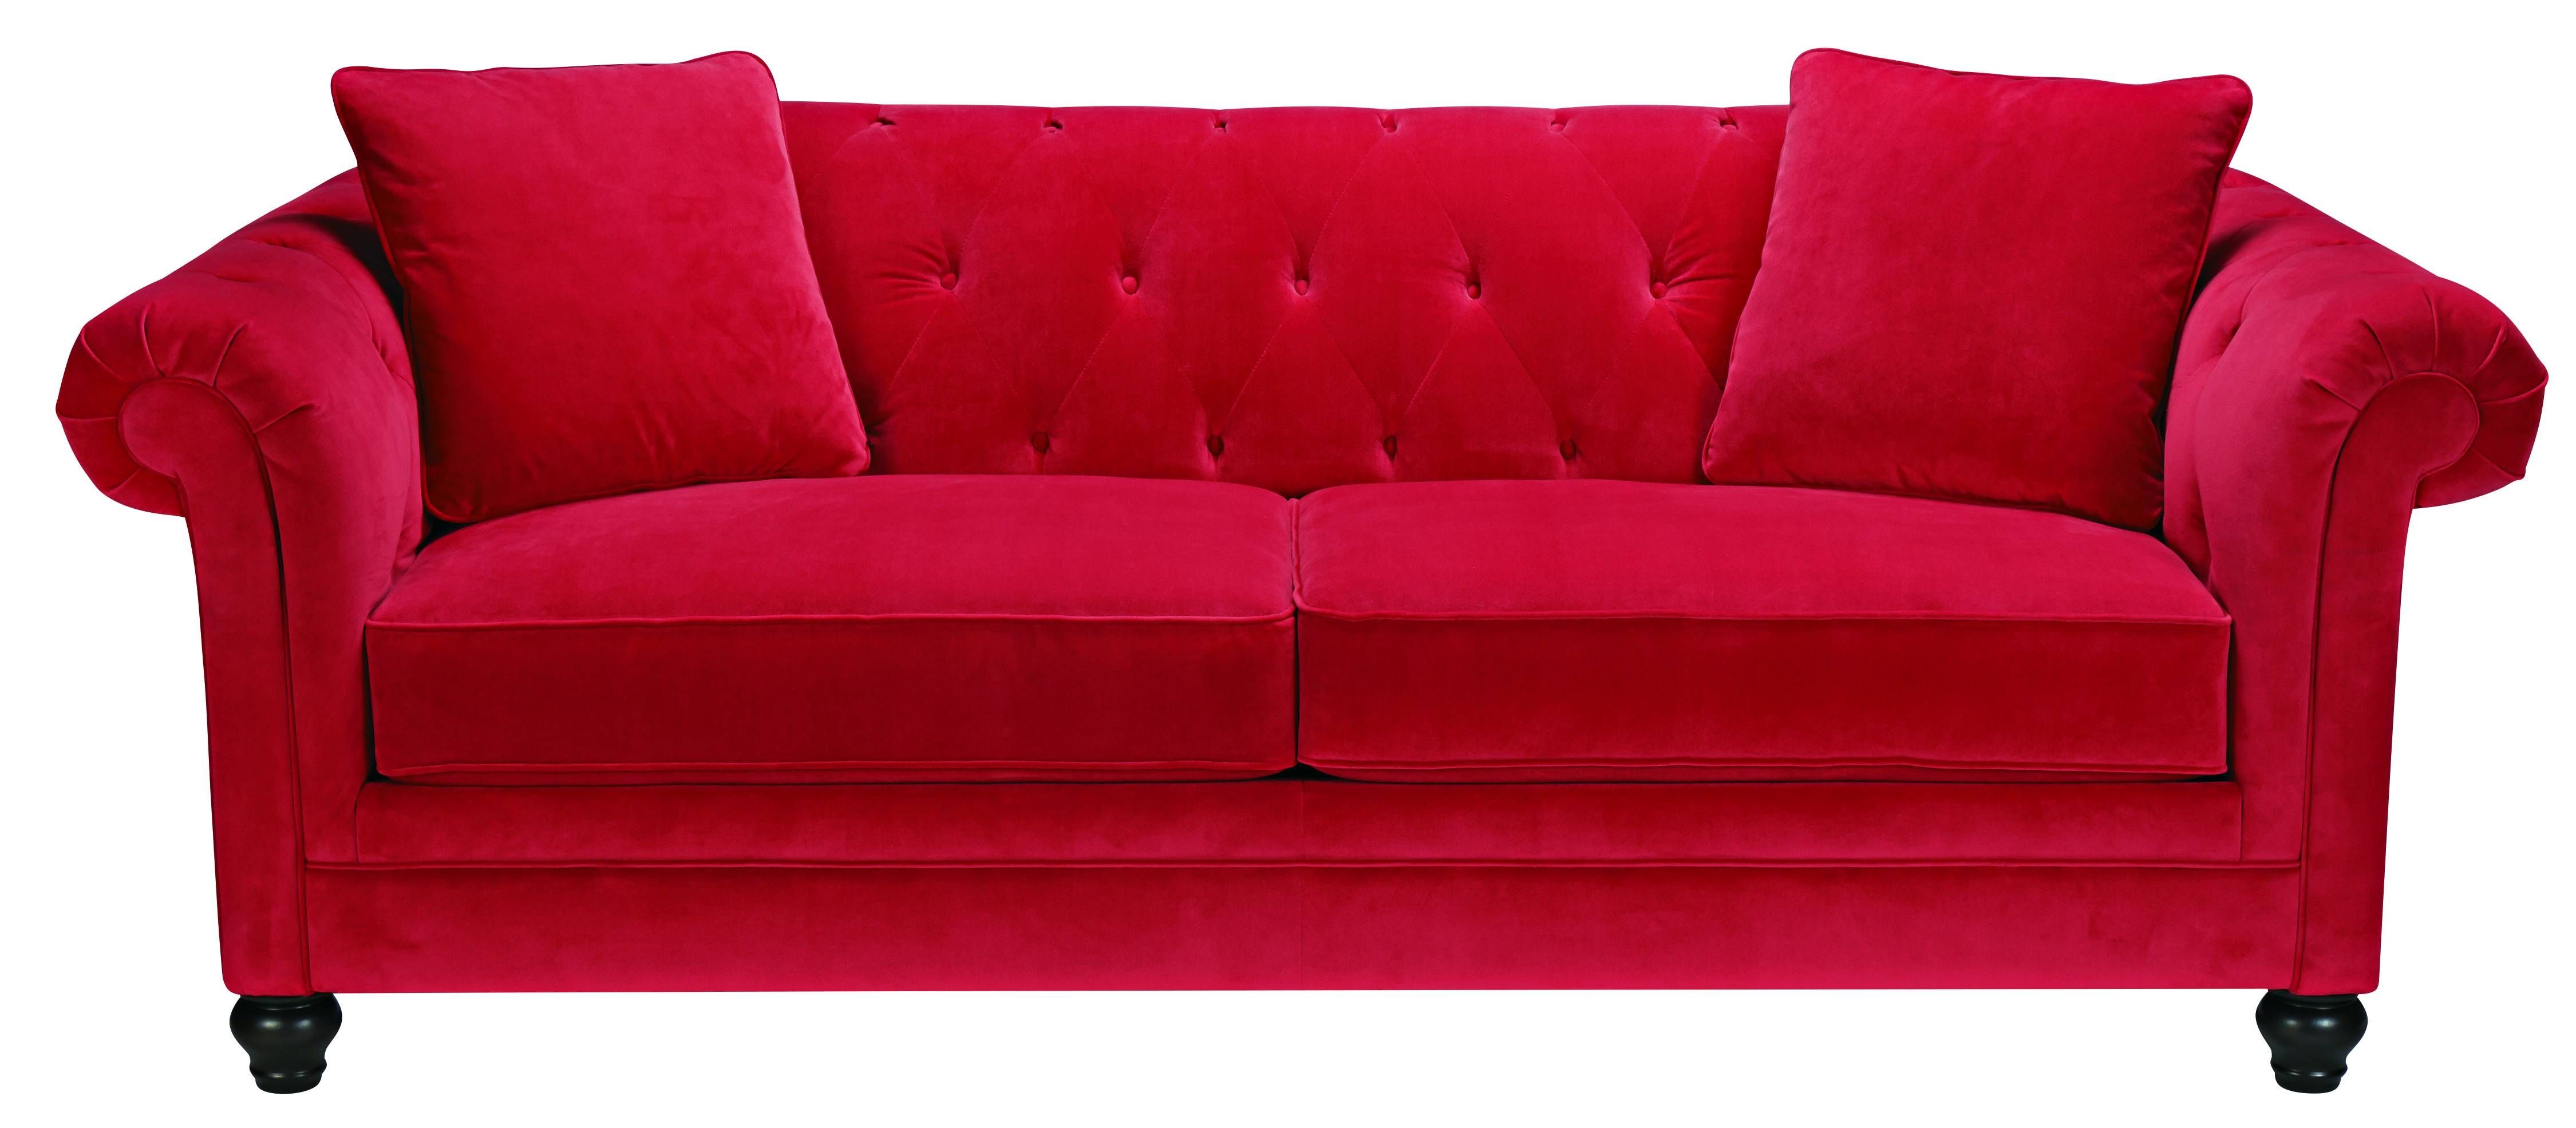 Decor: Endearing Maximize Sofa Throws For Gorgeous Living Room Intended For Red Sofa Throws (View 14 of 25)